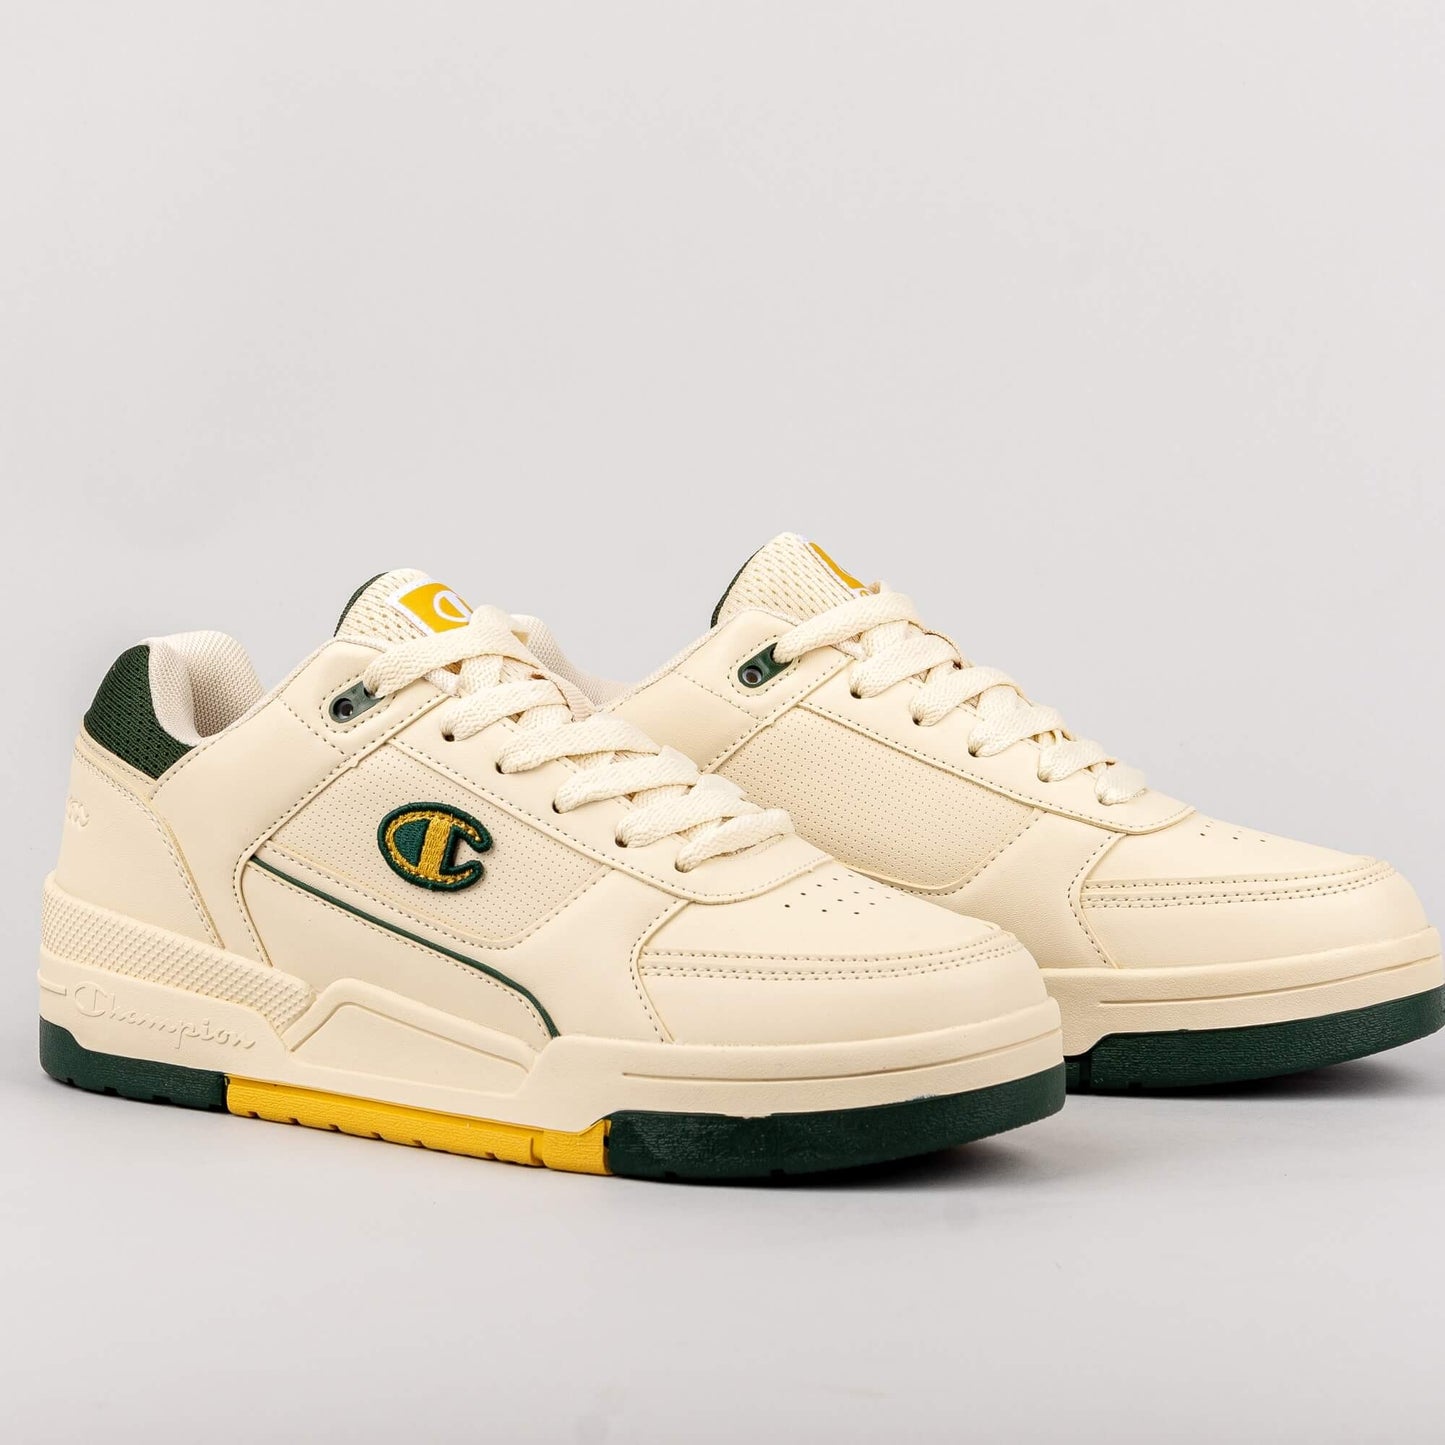 Champion Low Cut Shoe Rebound Heritage Low Off White/Green/Yellow